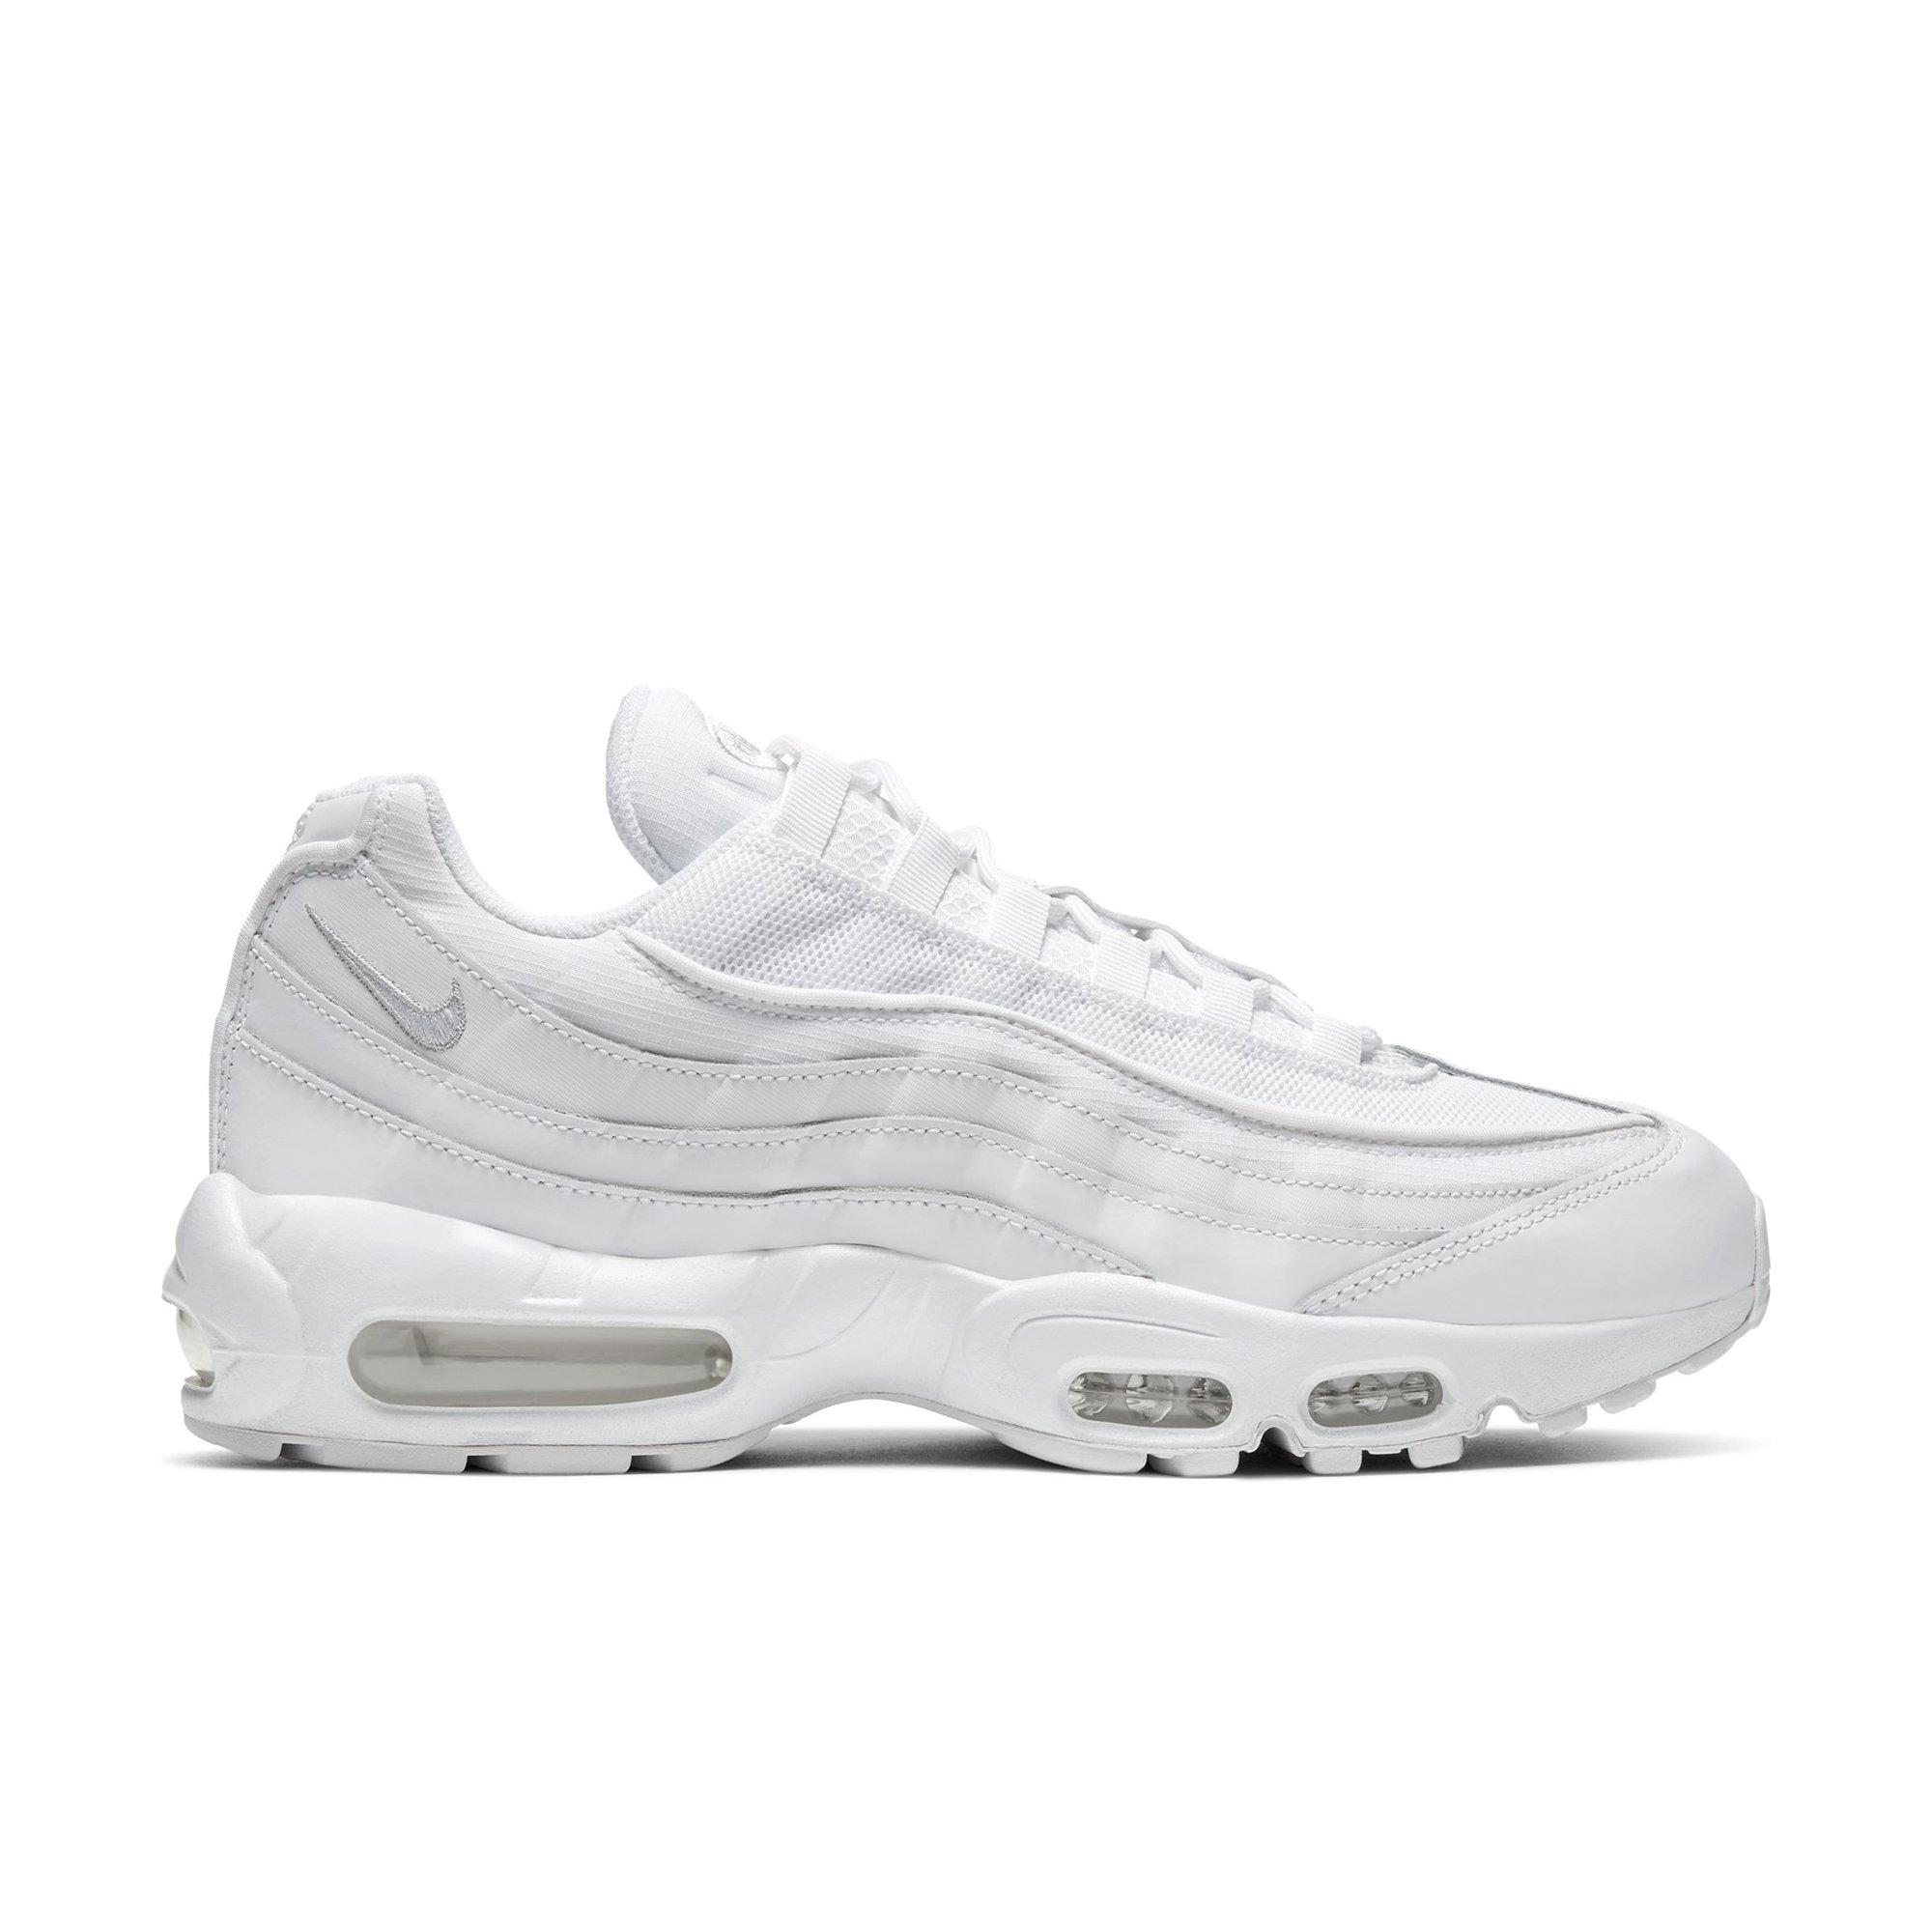 Comparable abrazo Conflicto Nike Air Max 95 Essential "White/White-Grey Fog" Men's Running Shoes